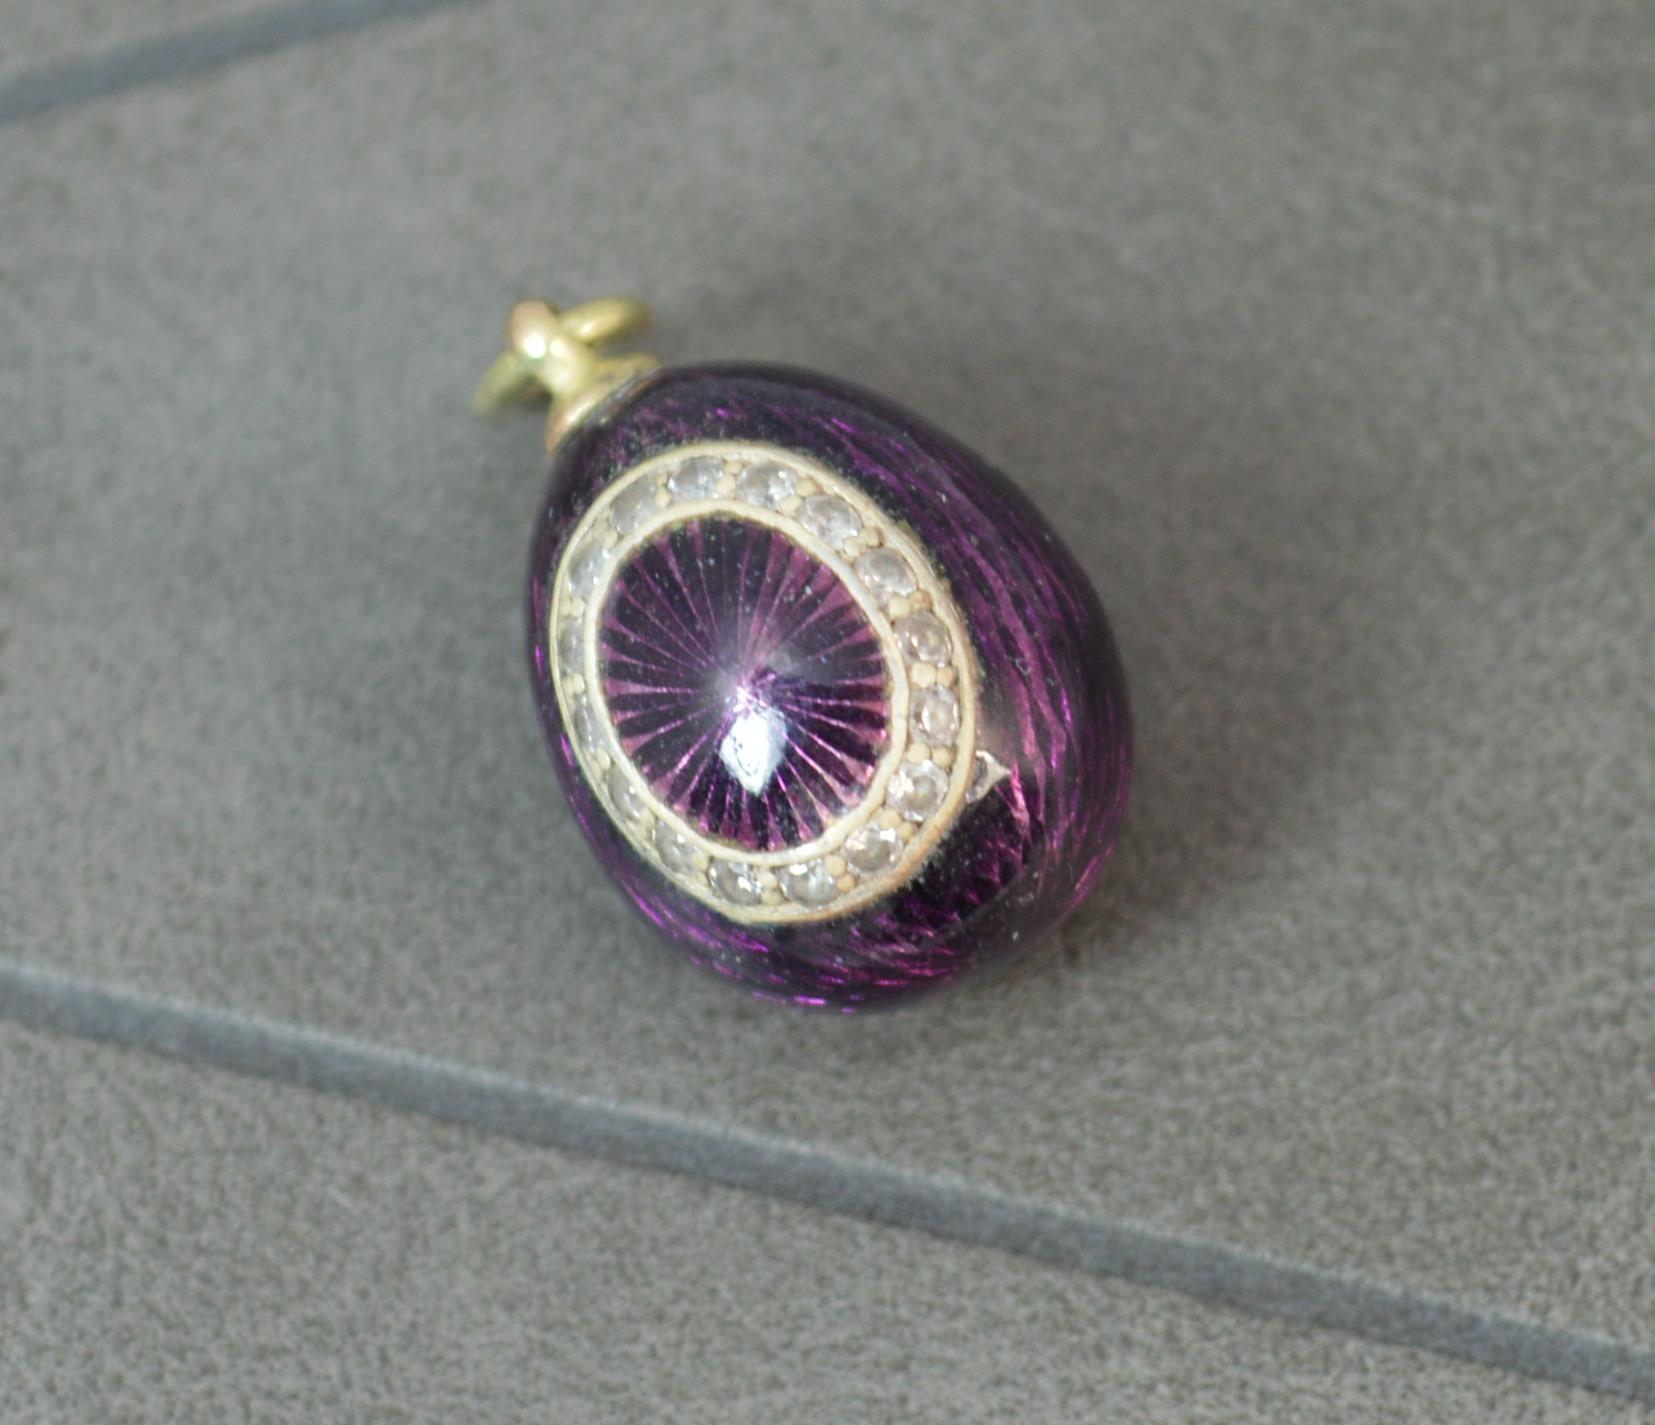 A stunning Russian egg charm pendant.
14 carat yellow gold top.
Deep rich purple enamelling.
Oval stone set design to one side. White round cut stones.

CONDITION ; Very good for age. Clean piece. Well set stones, light wear. Issue free. A beautiful